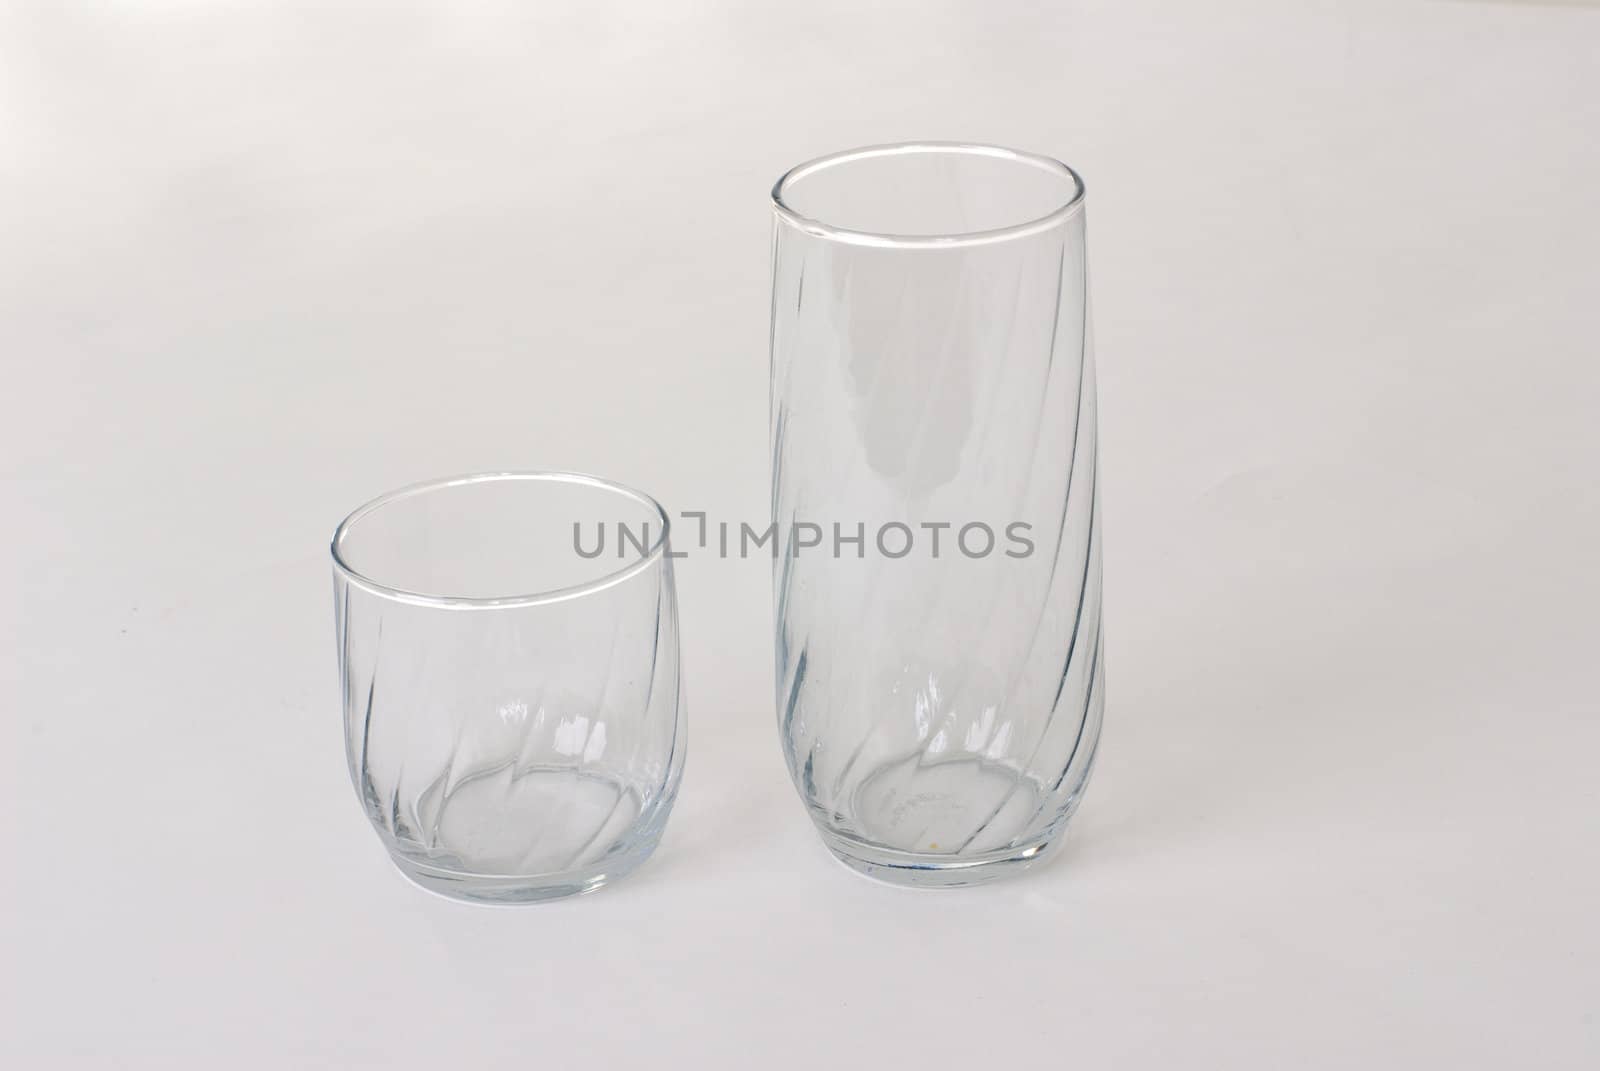 Empty glasses on a white background.